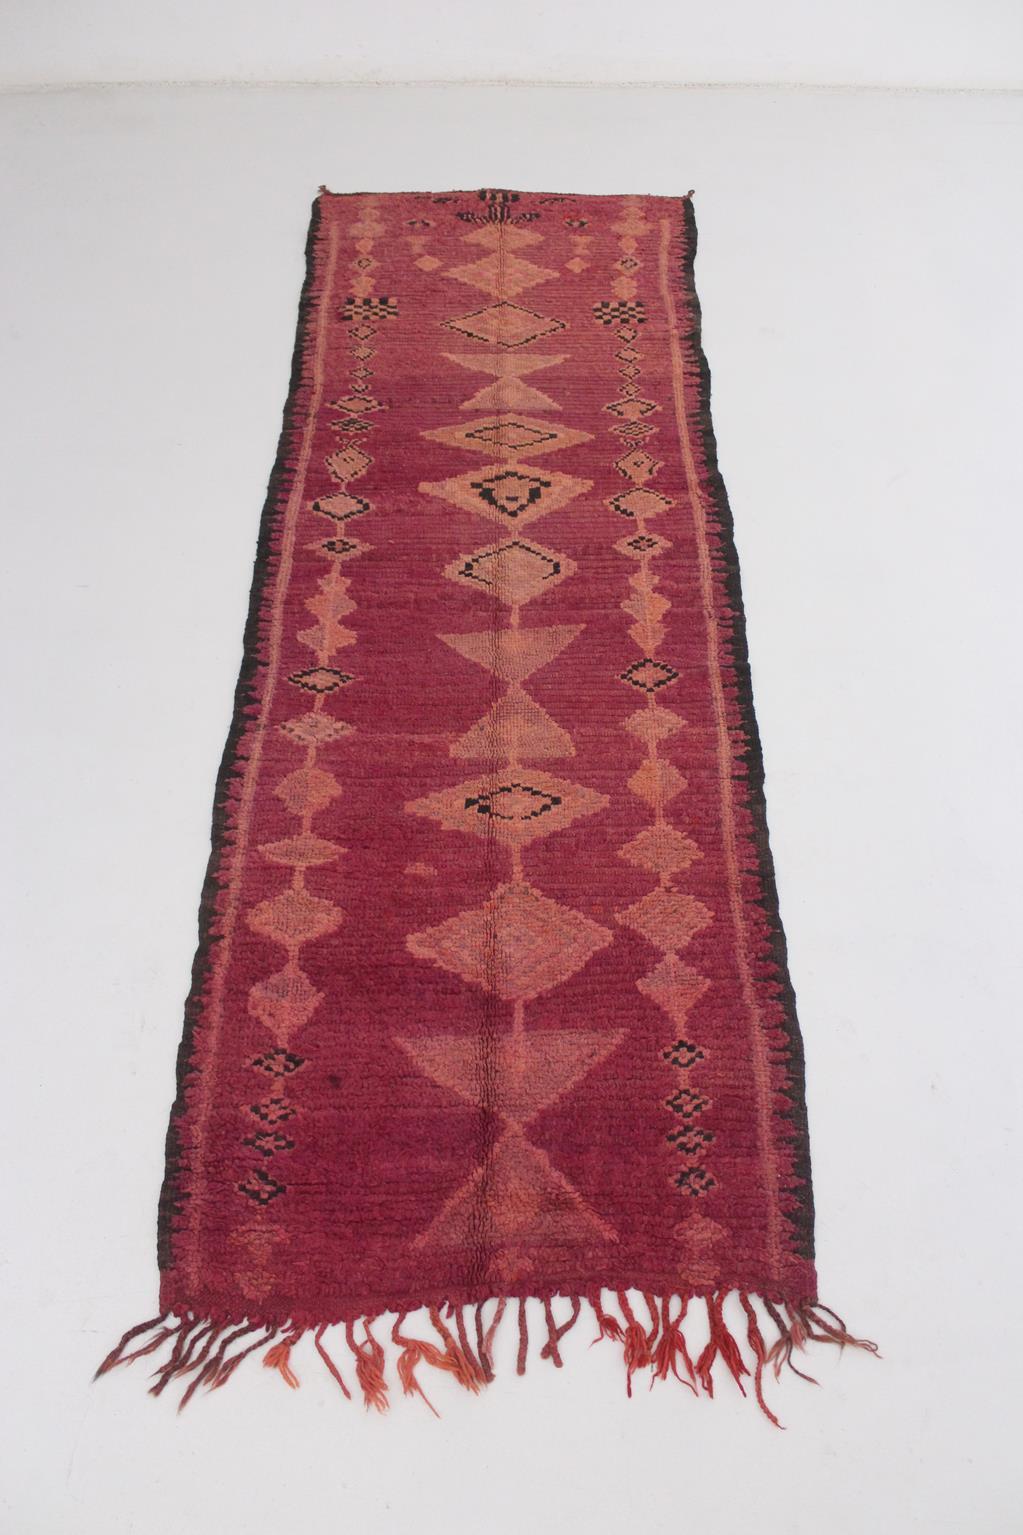 This real vintage runner rug was probably made in the Boujad region, North Morocco. It is a crazy beautiful, very elegant piece with lovely designs -the traditional diamond series- and such a deep color!

Background color is a 